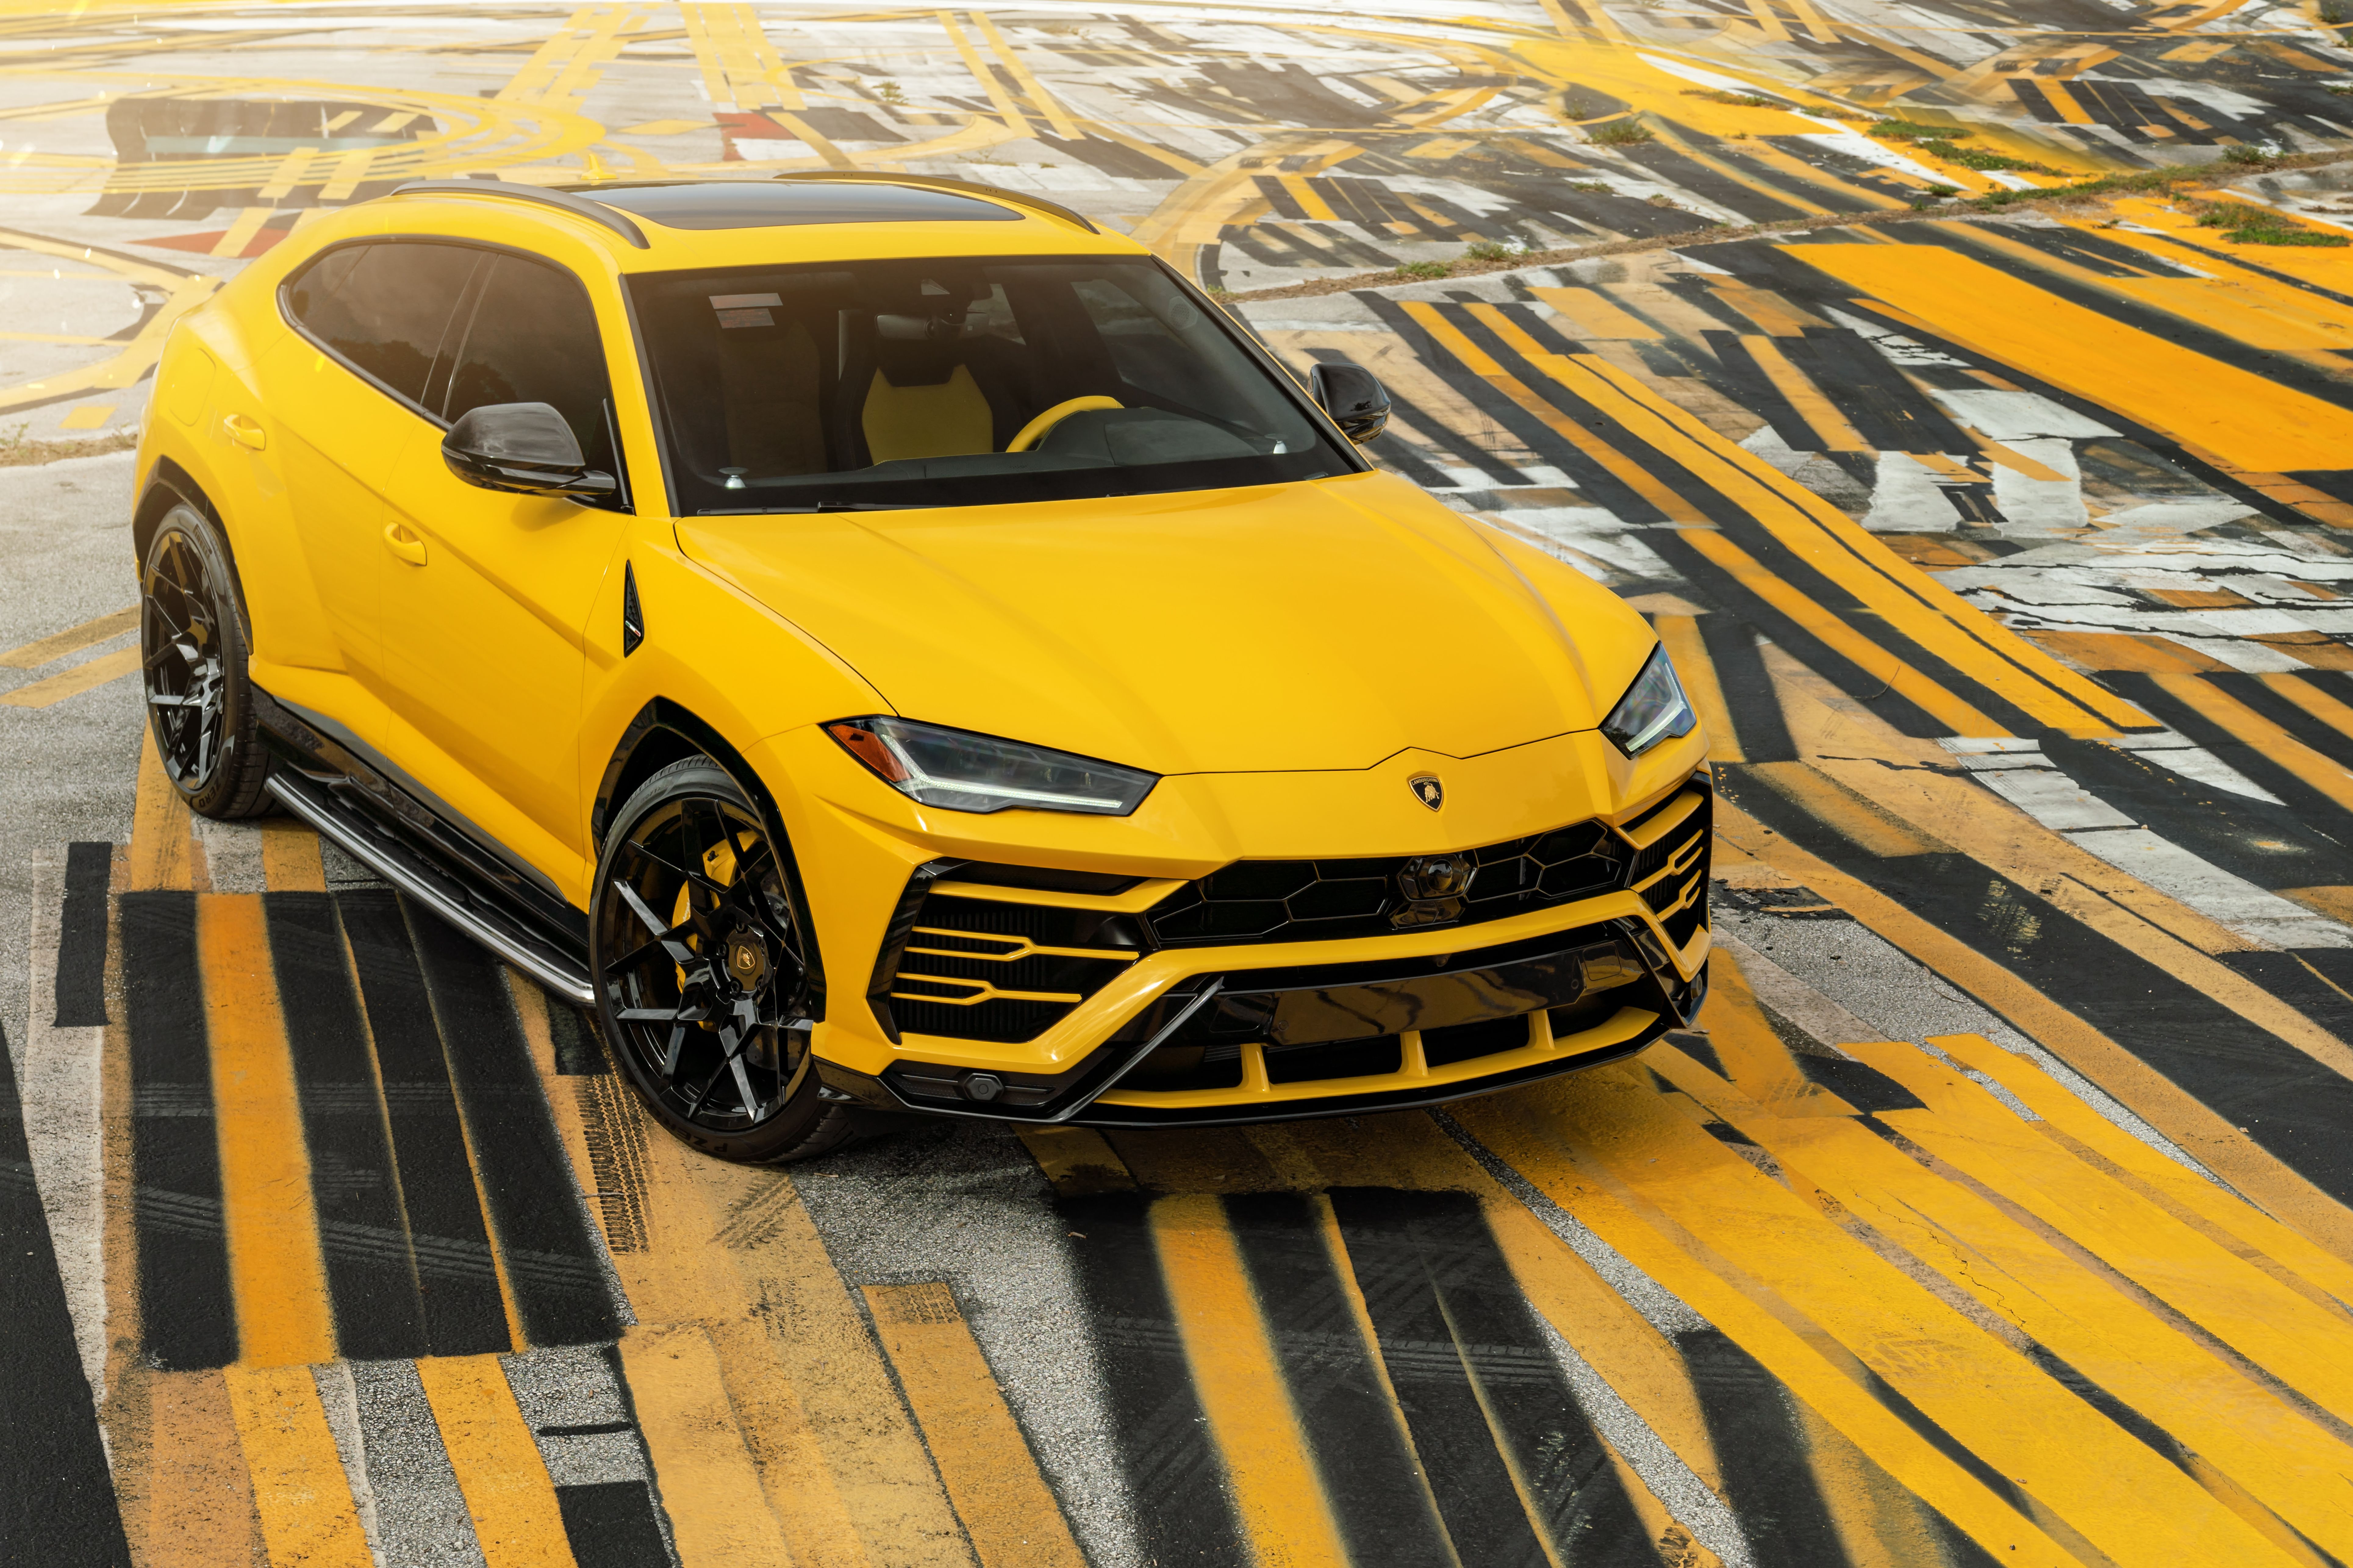 Lamborghini Urus Black Wallpaper 4K / If you find one that is protected